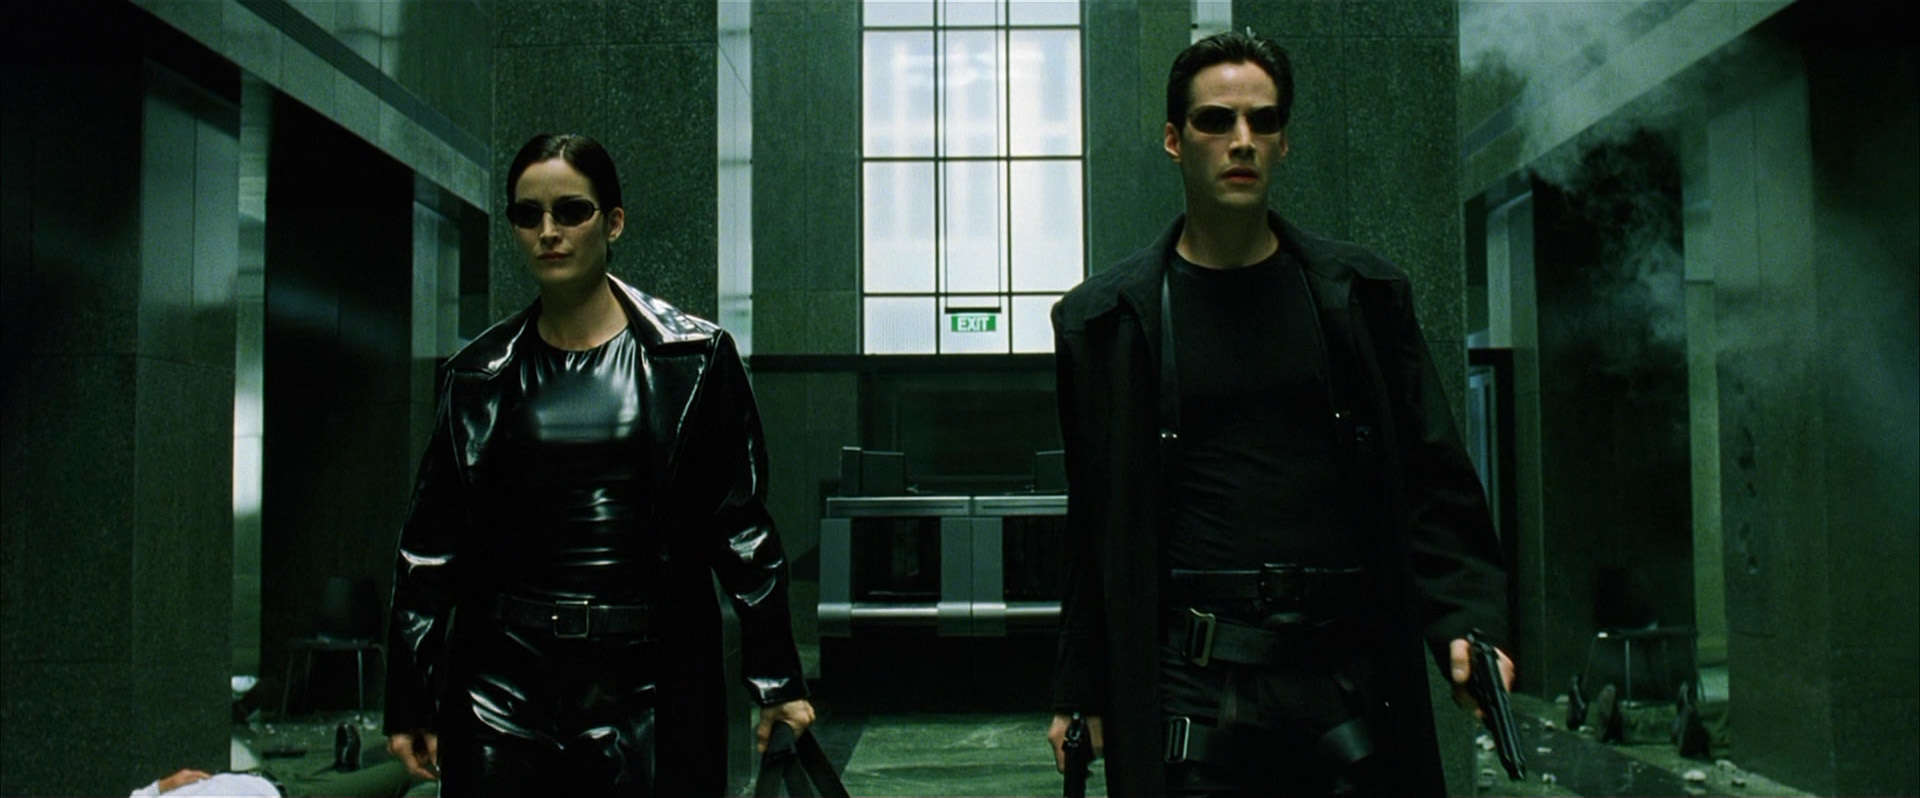 A woman and a man wearing sunglasses hold guns and walk down a hall in this image from Warner Bros. Pictures.